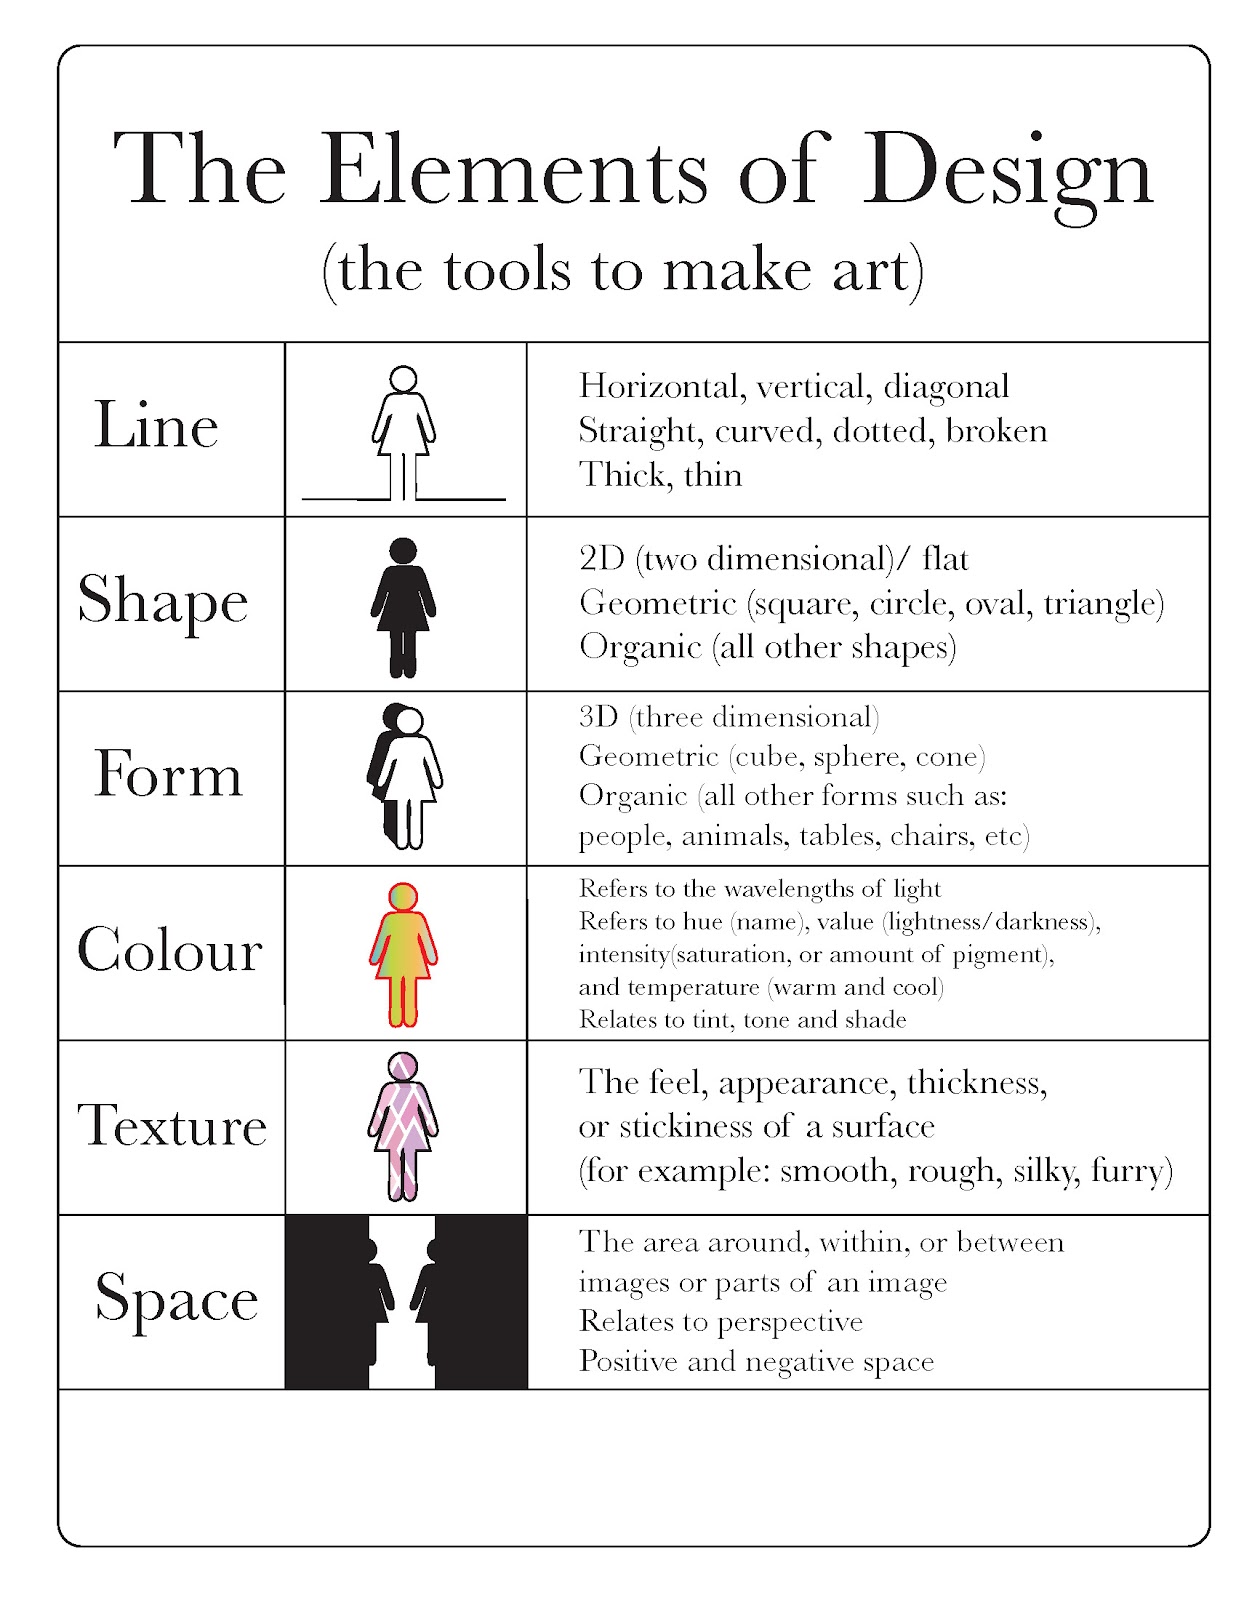 elements and principles of design